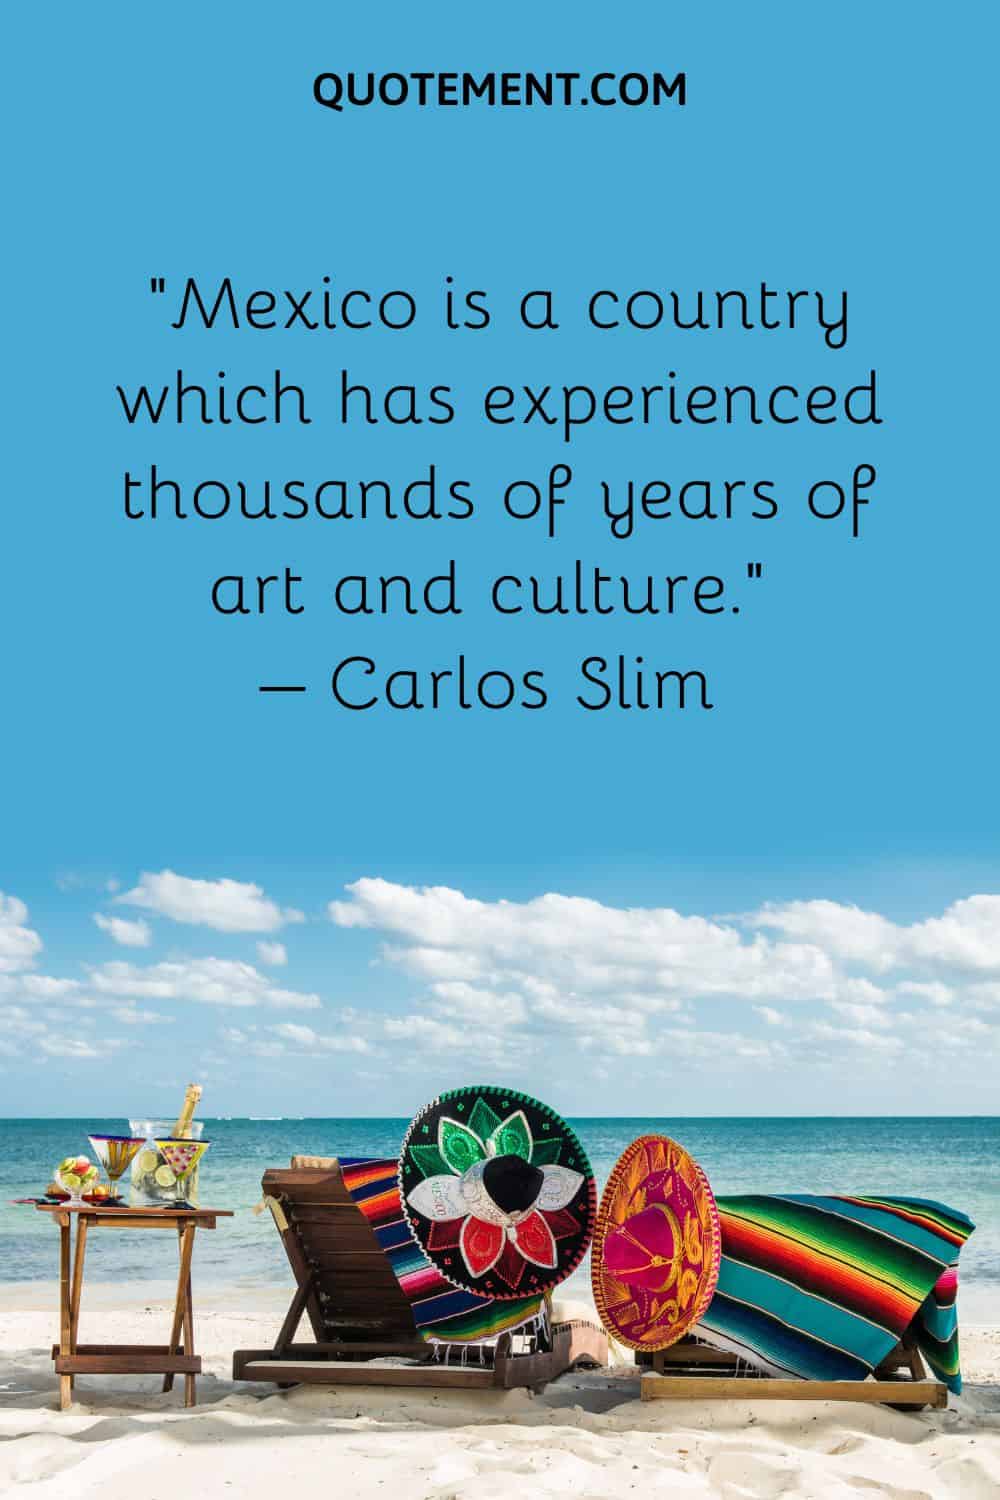 Mexico is a country which has experienced thousands of years of art and culture.